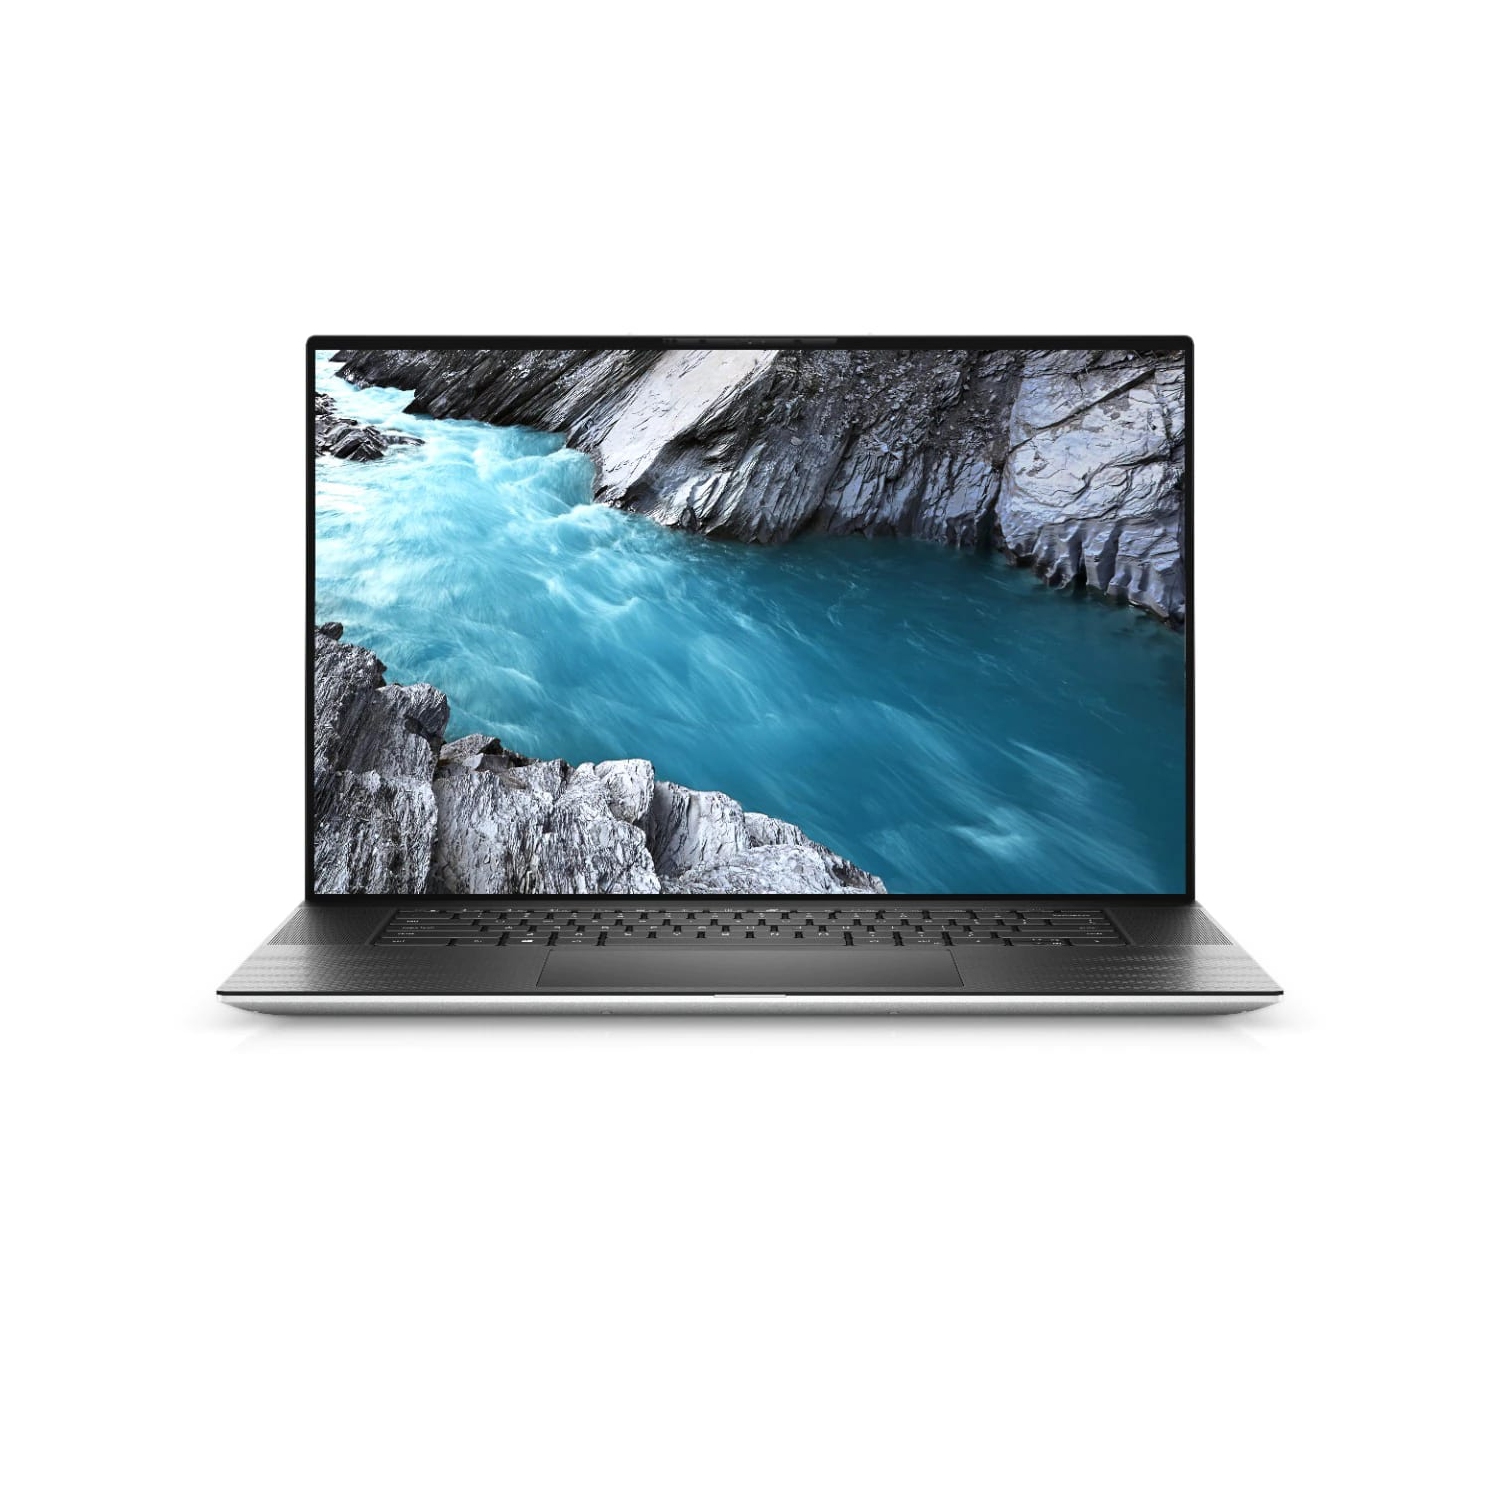 Refurbished (Excellent) - Dell XPS 17 9700 Laptop (2020) | 17" 4K Touch | Core i7 - 1TB SSD - 16GB RAM - RTX 2060 | 8 Cores @ 5.1 GHz - 10th Gen CPU Certified Refurbished